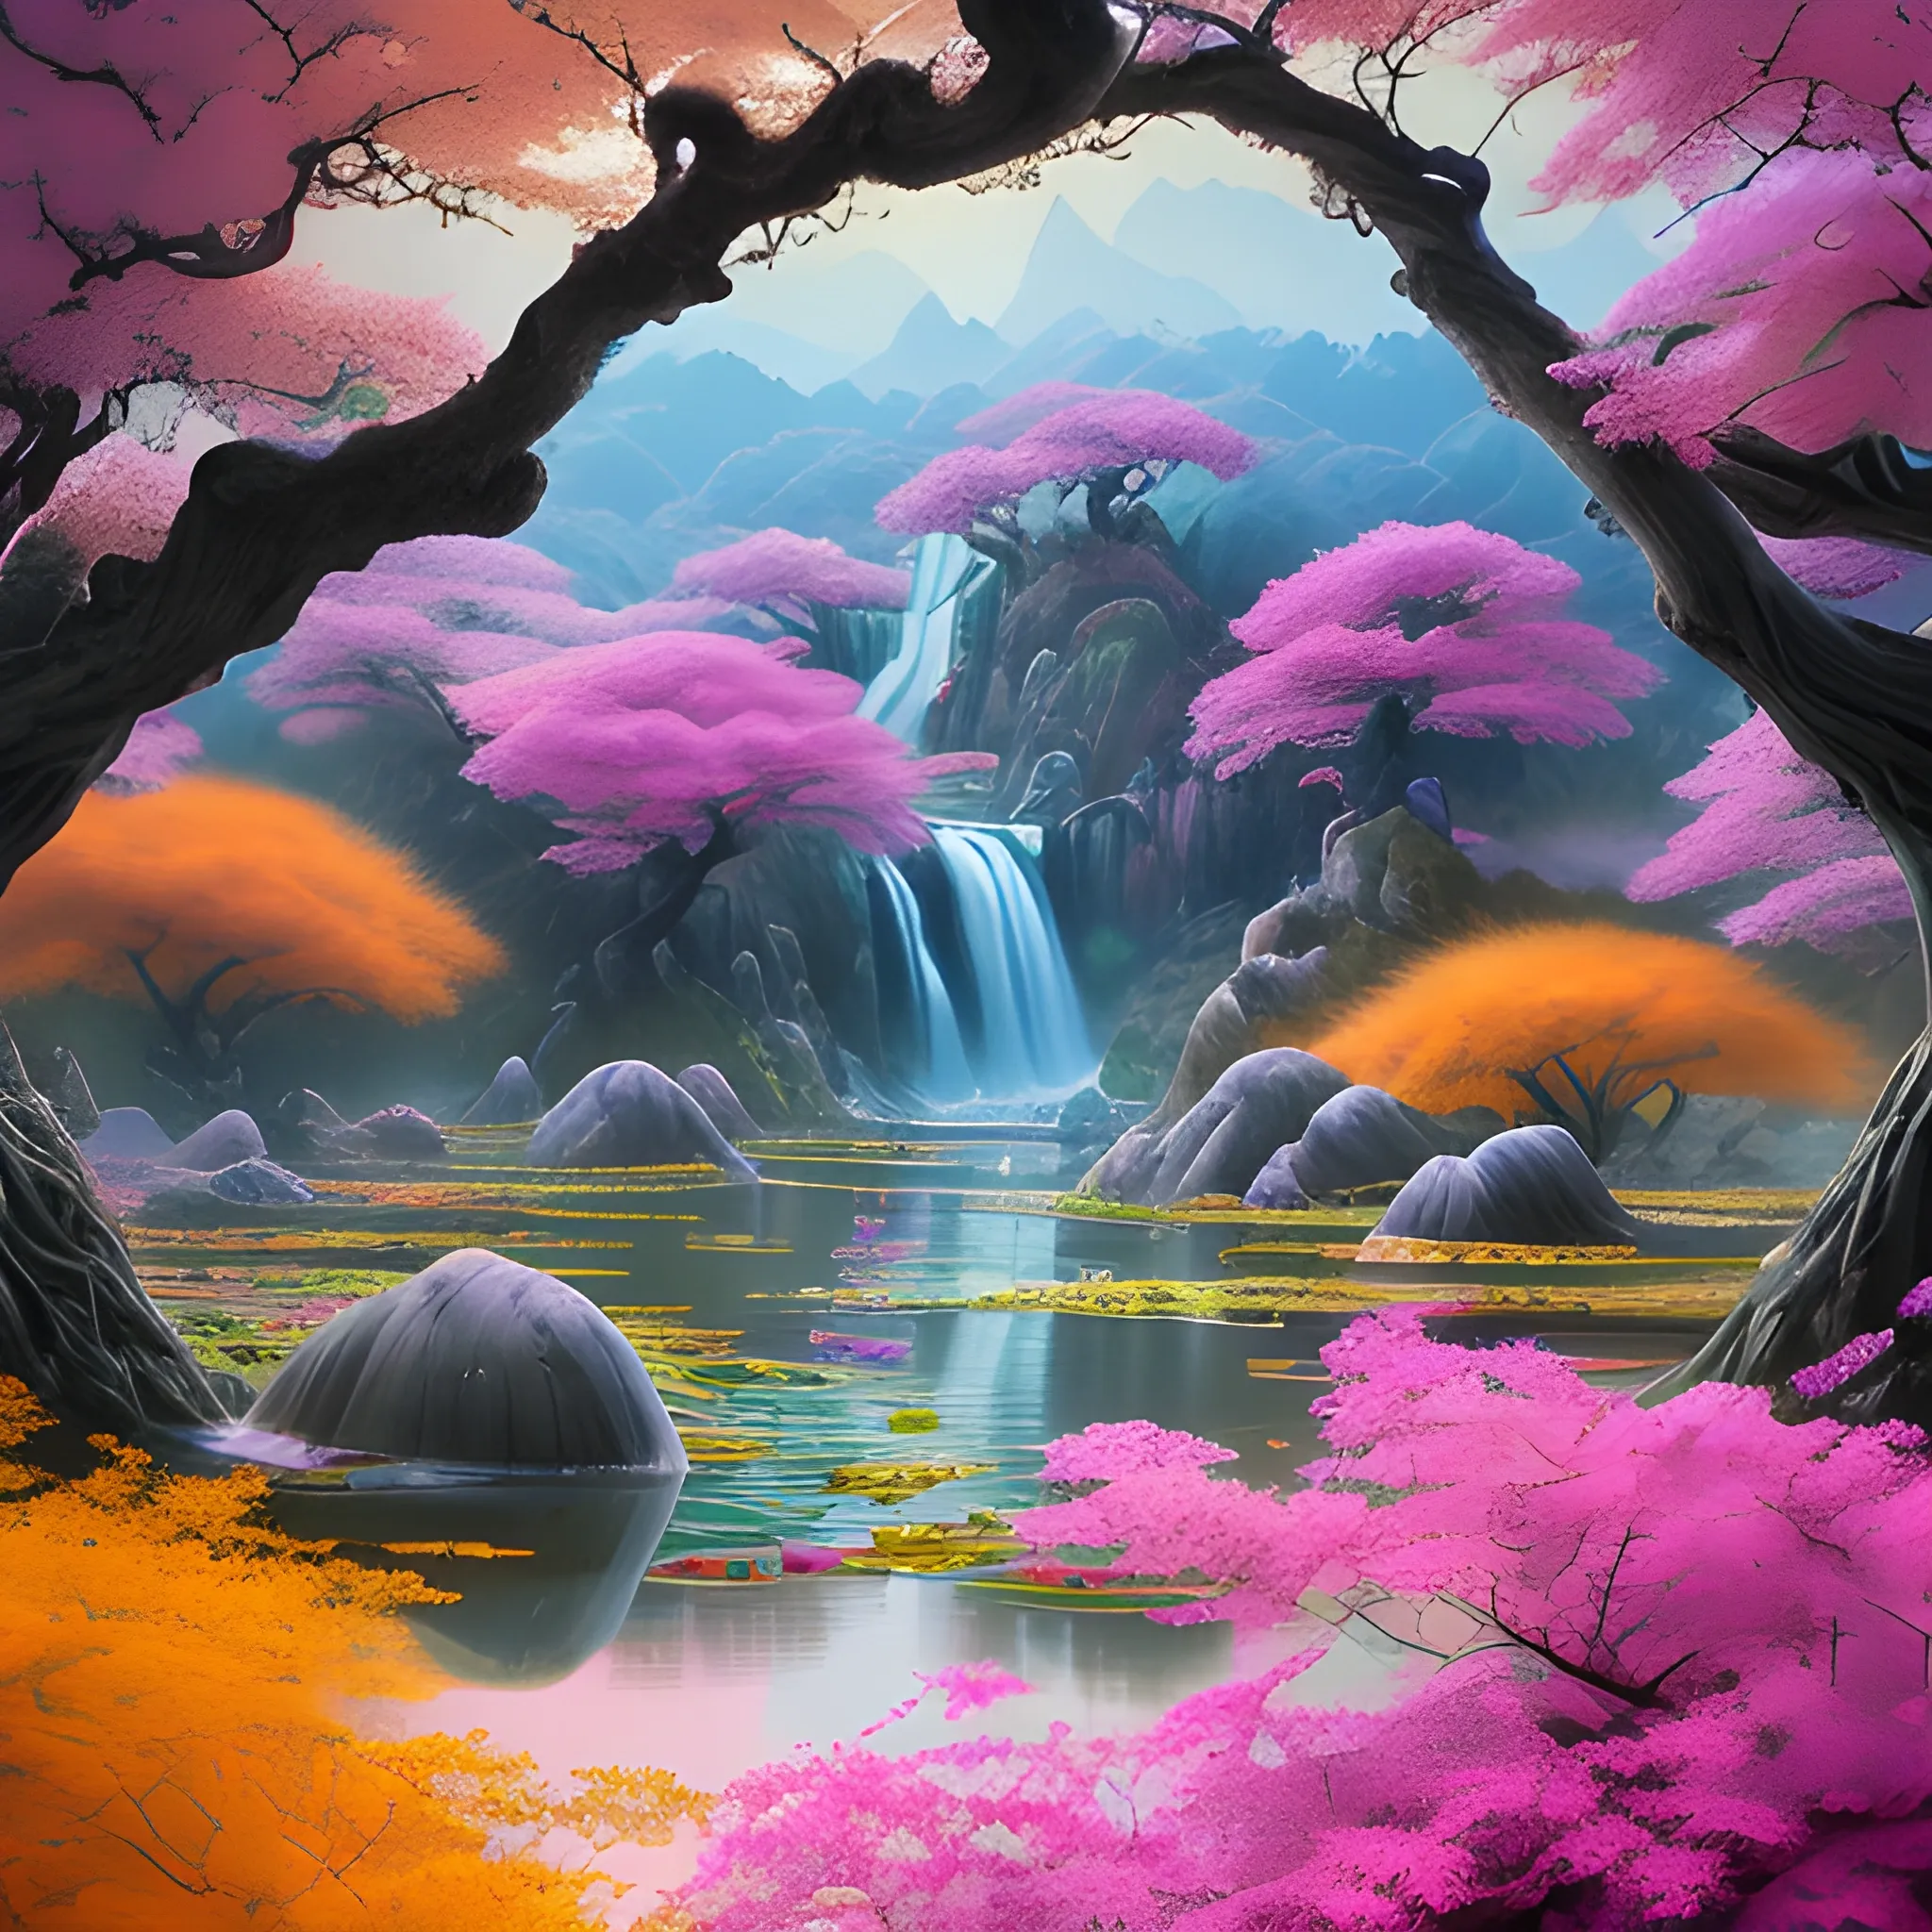 (by Ananta Mandal (and Andrew Biraj:0.5)), (in the style of nihonga), Style: Abstract, Medium: Digital illustration, Subject: A Guanshiyin Pusa in the middle of picture, An otherworldly landscape with floating islands, cascading waterfalls, and vibrant flora and fauna. Camera Angle: Overhead shot capturing the vastness and intricate details of the scene. The colors are saturated, and the lighting creates a warm and ethereal atmosphere. The painting is highly detailed, with every brushstroke capturing the complexity of the imaginary world., (high quality), (detailed), (masterpiece), (best quality), (highres), (extremely detailed), (8k), seed:792315689